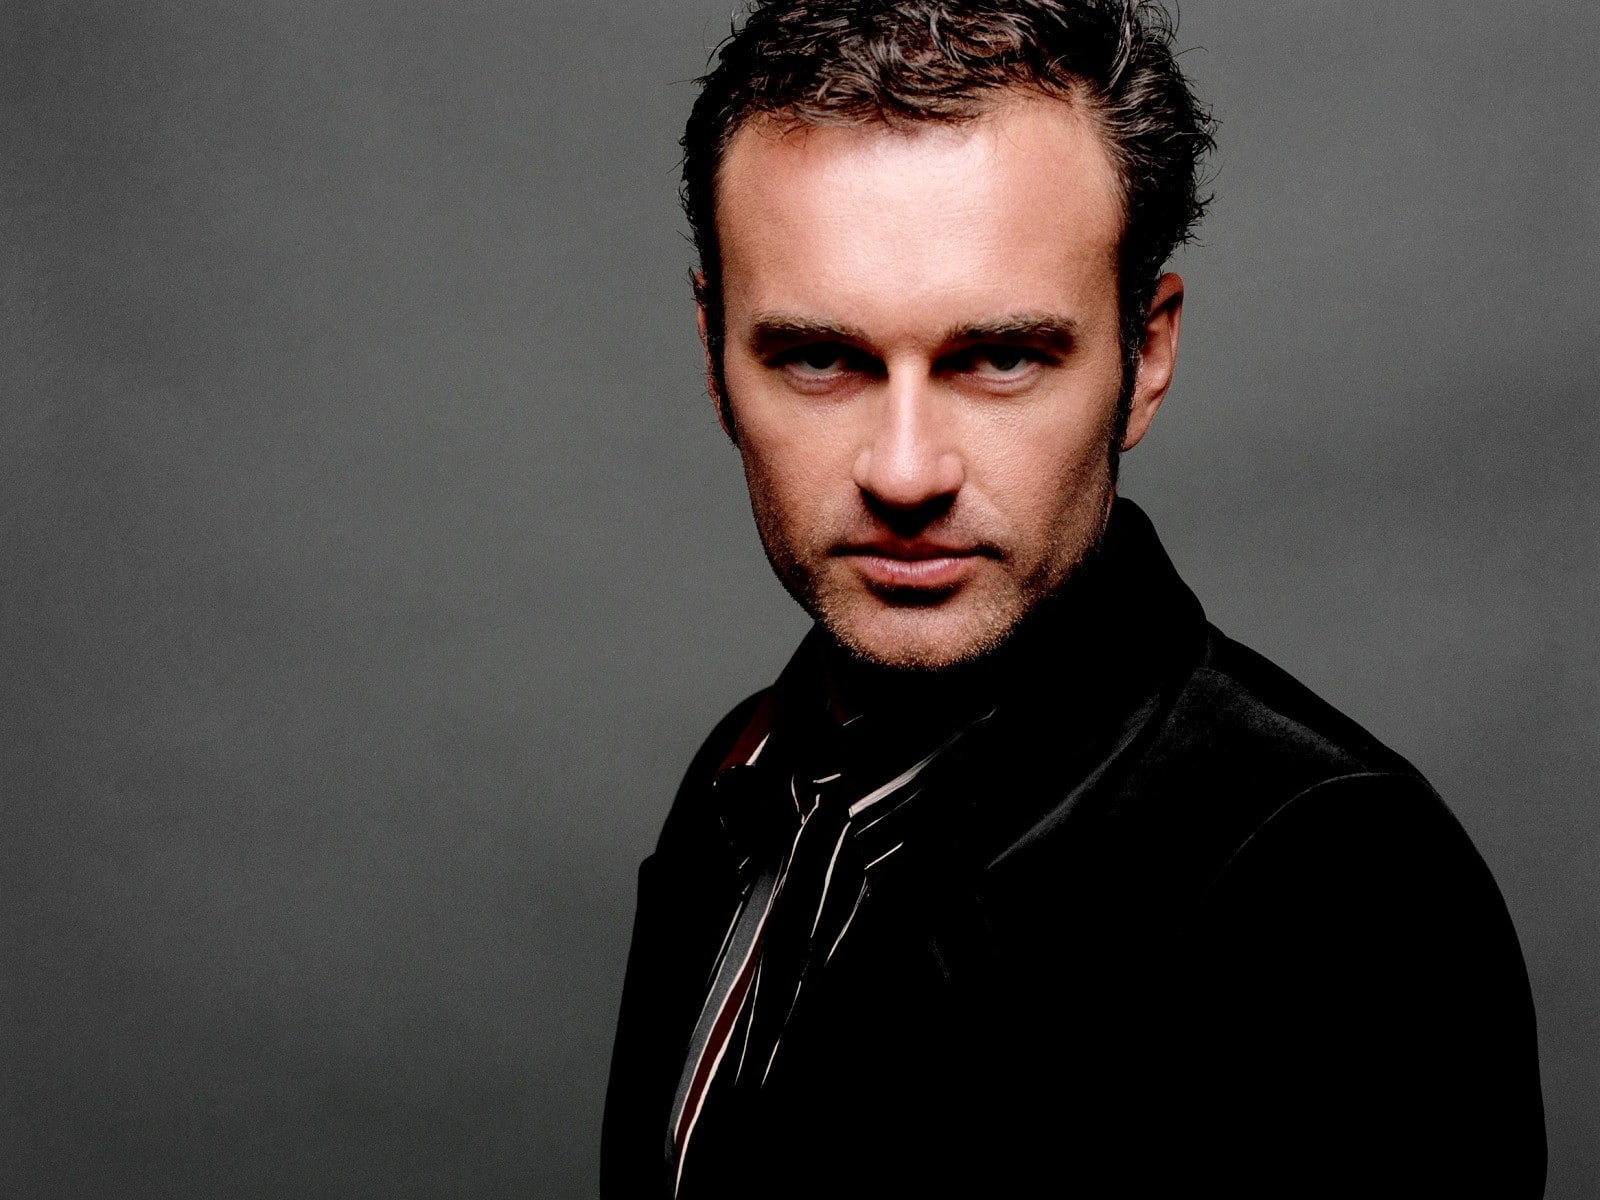 Julian mcmahon, Charmed, Cole turner, one person, young adult